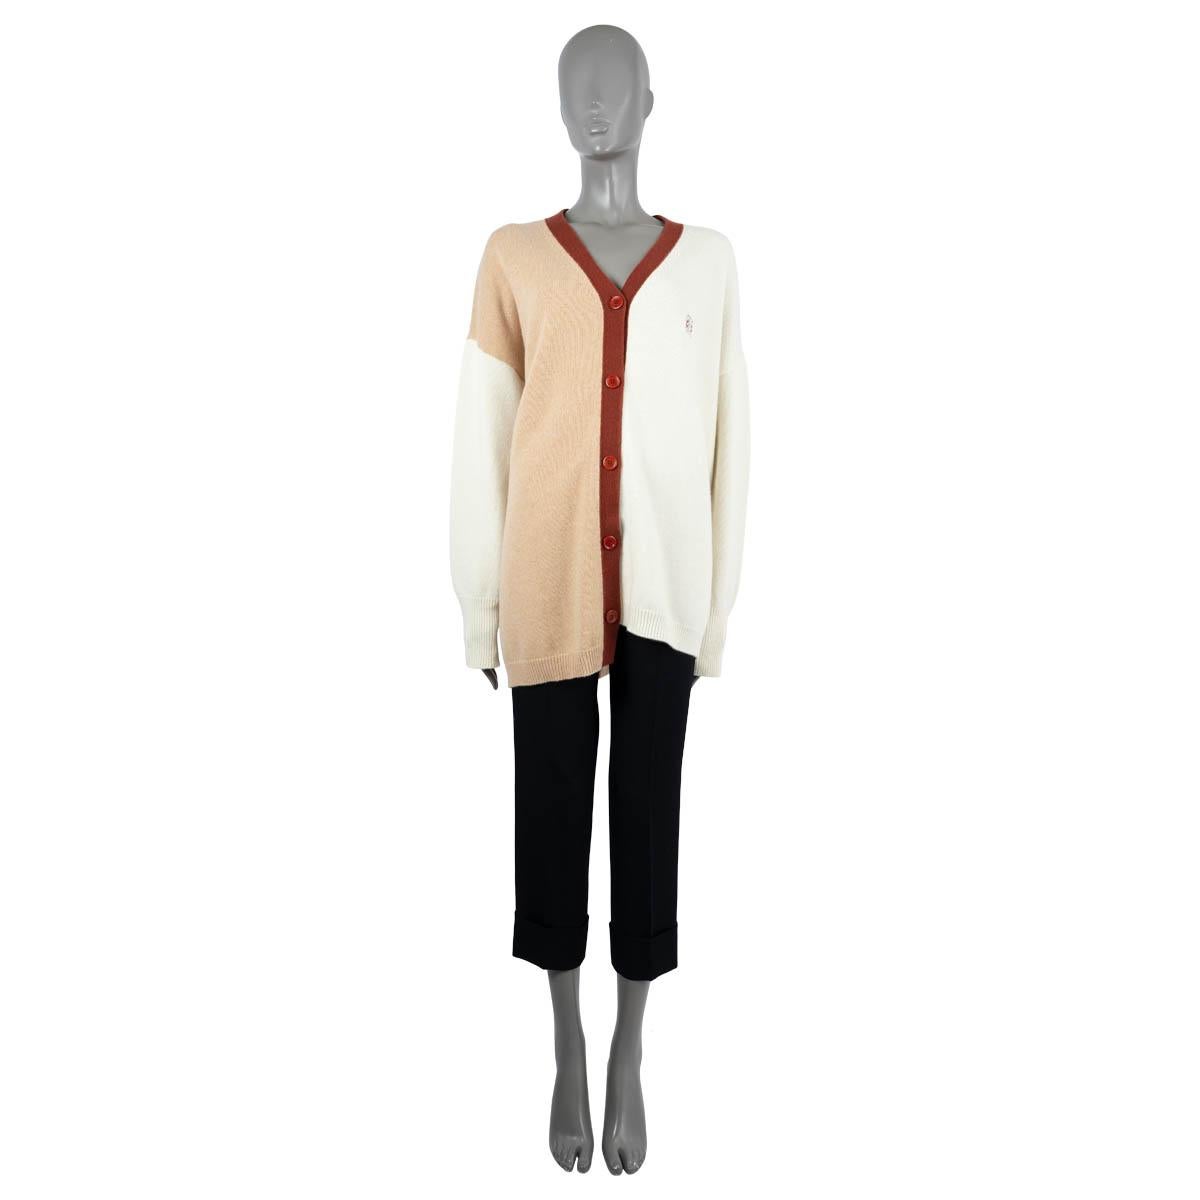 100% authentic Loewe colorblock cardigan in ivory and beige wool (100%). Features a V-neck, an asymmetric hem line, ribbed cuffs and hem, a contrast burgundy trim and Anagram embroidery. Relaxed fit with drop shoulders. Closes with buttons on the